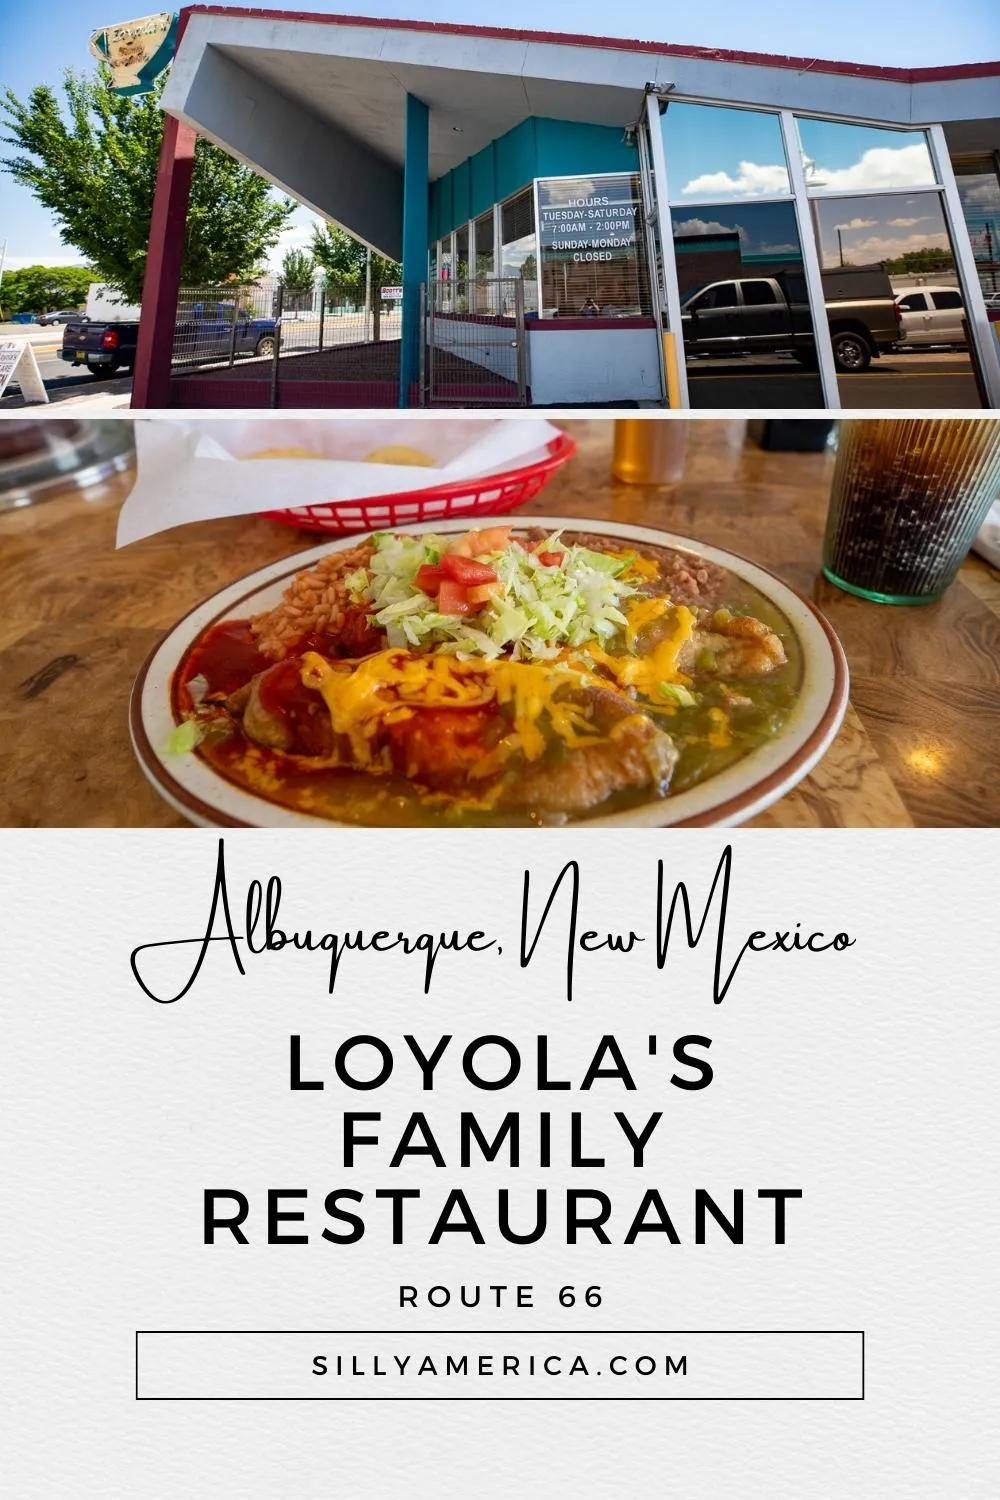 Looking for some of the best breakfasts and Mexican food in Albuquerque that attracts locals, road trippers, and film crews alike? Take a break from the road and stop for a meal at Loyola's Family Restaurant in Albuquerque, New Mexico. This Route 66 restaurant and Breaking Bad Filming location is a popular stop for lunch or breakfast on Route 66 in Albuquerque. Stop by on your road trip and add it to your travel itinerary! #Route66 #Route66Restaurant #Route66RoadTrip #RoadTrip